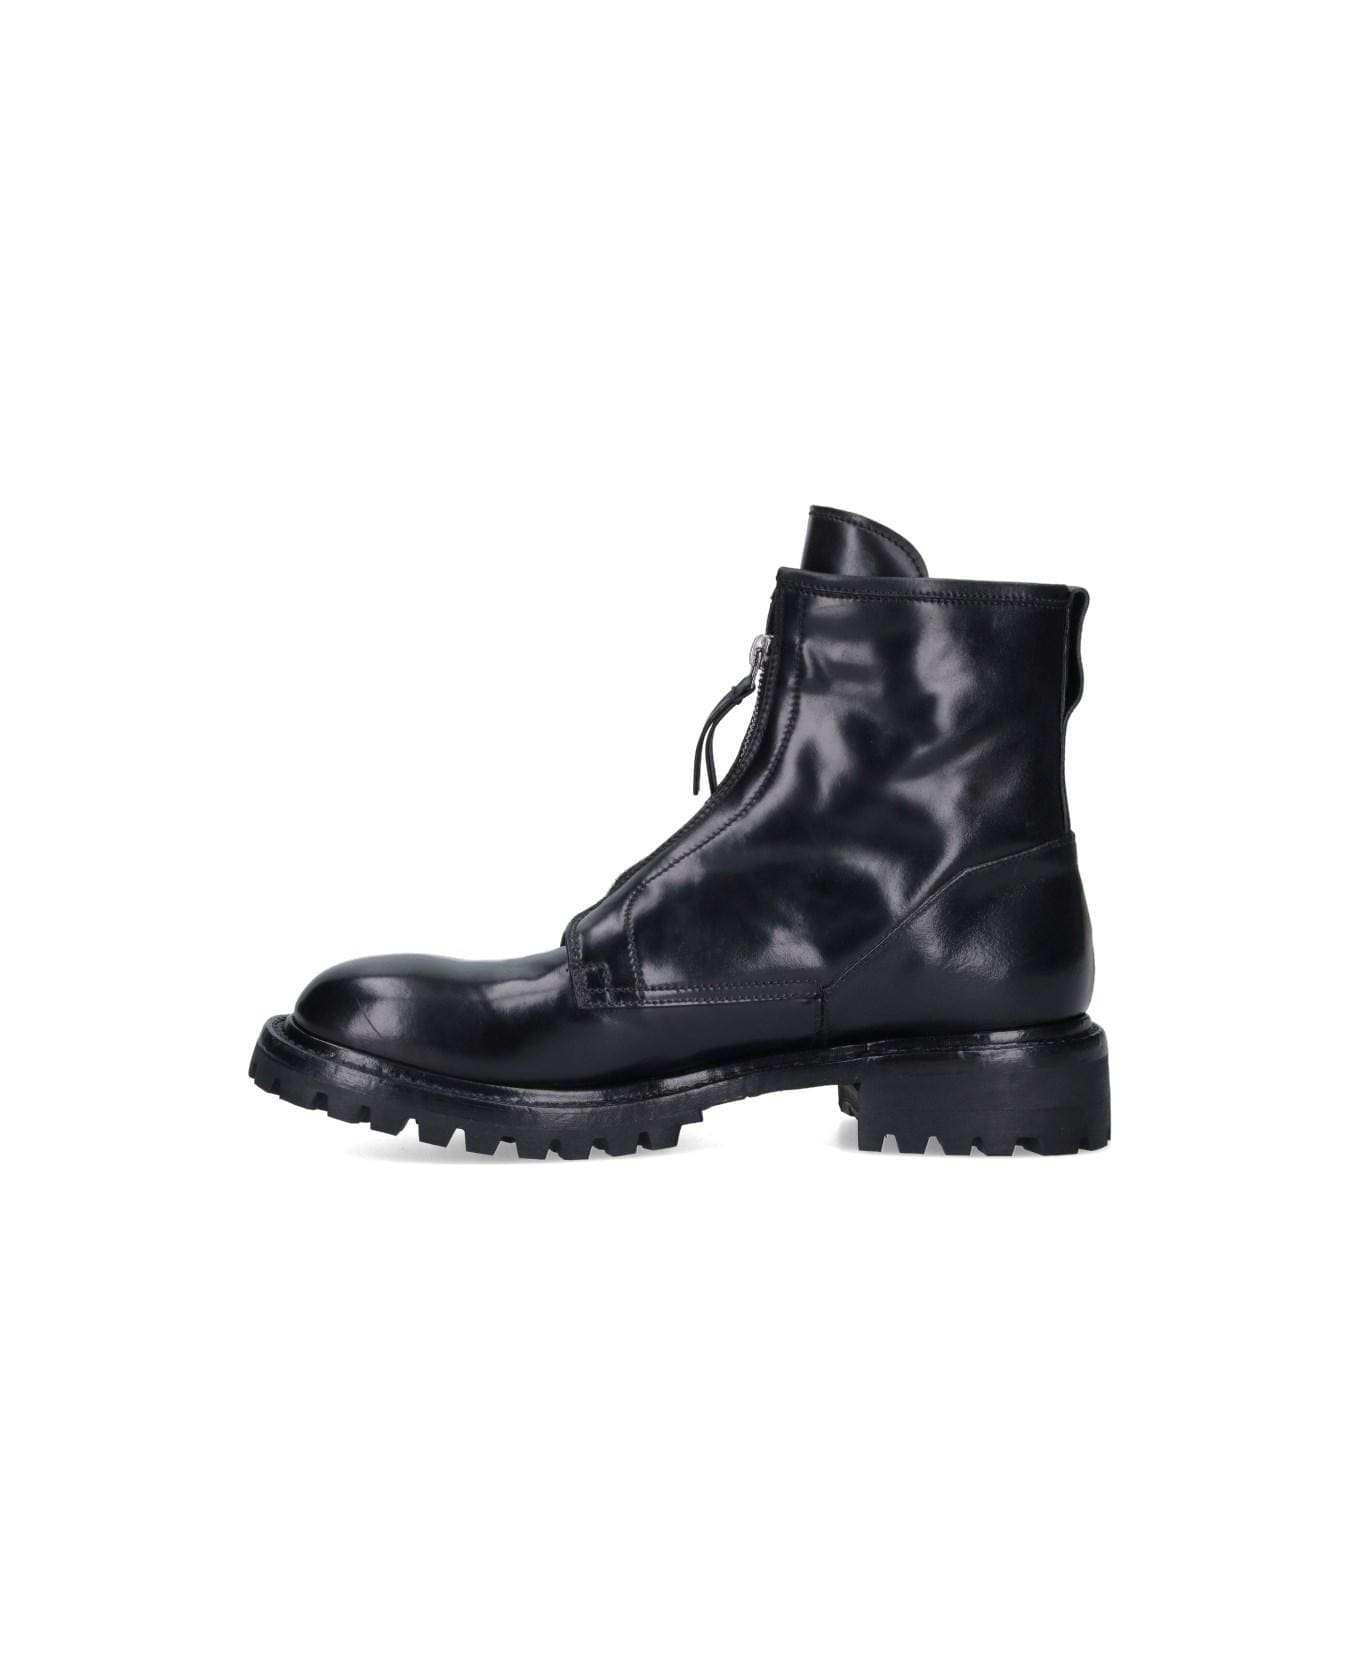 Premiata Leather Ankle Boots Boots - BLACK